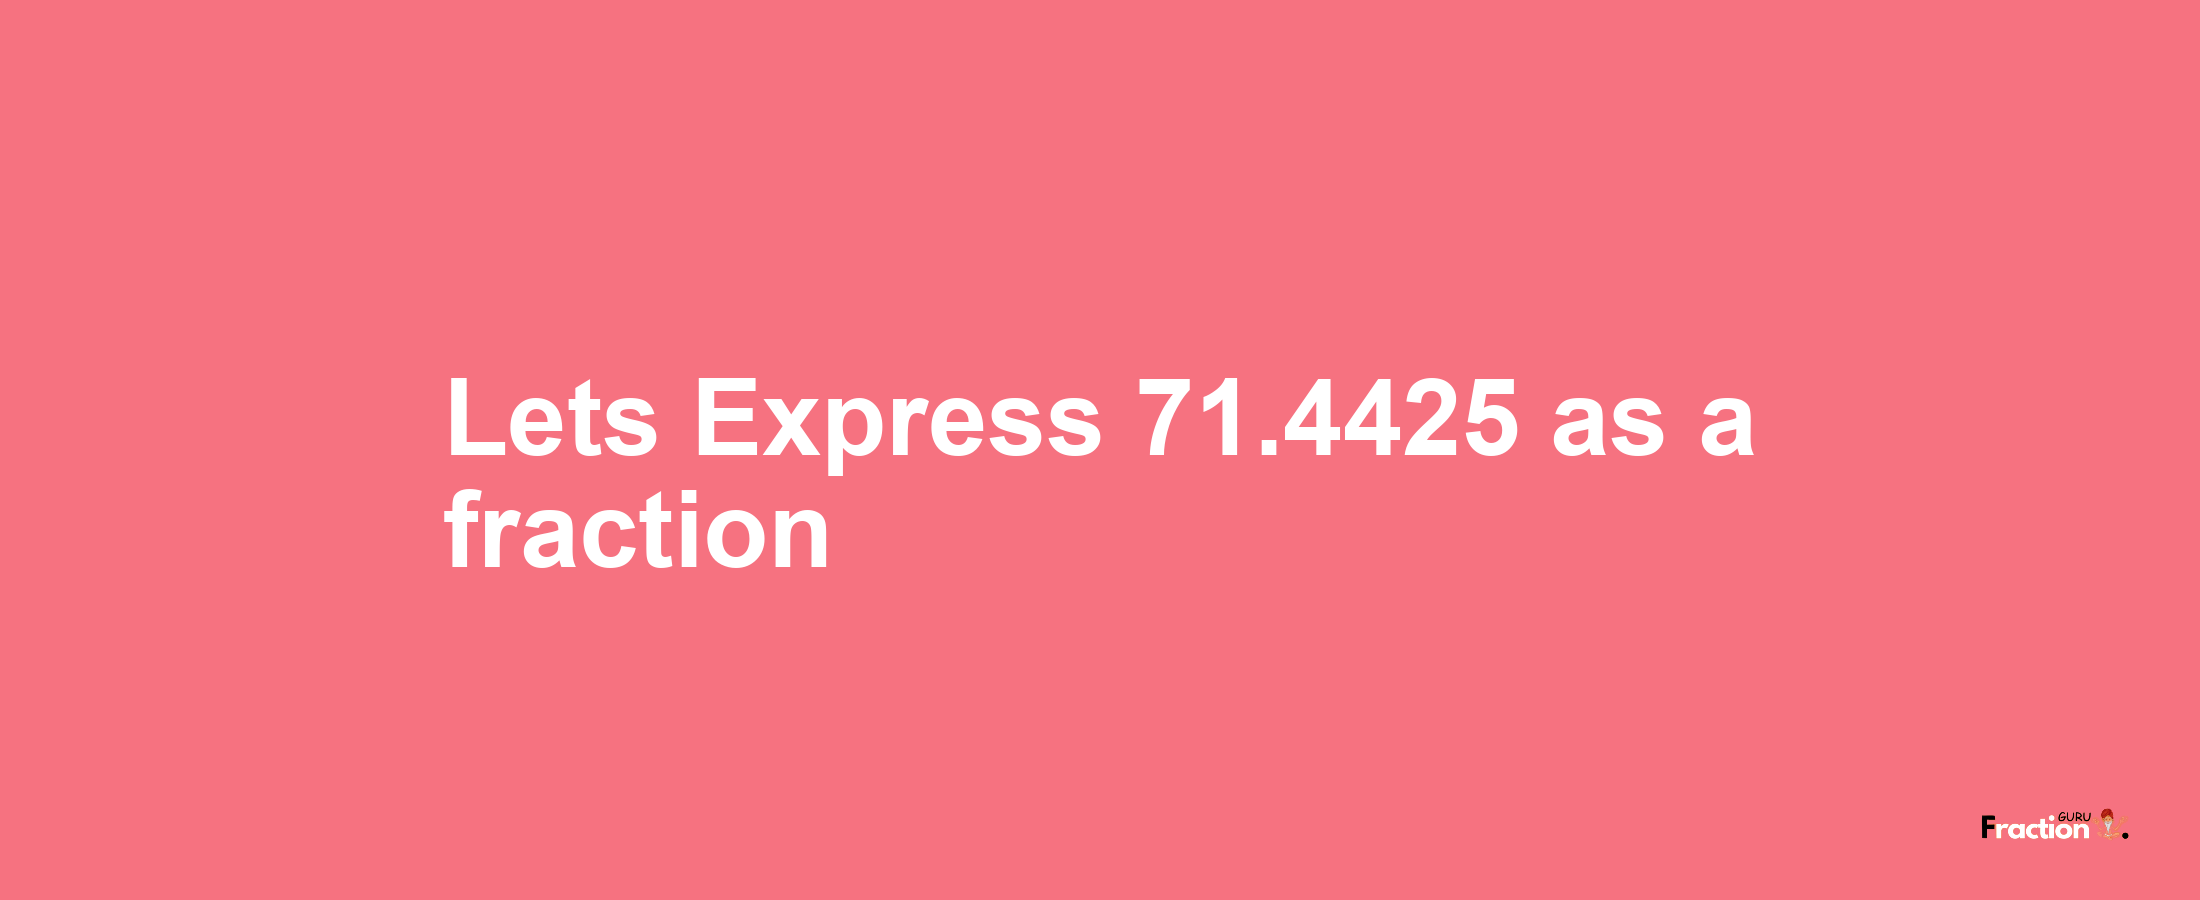 Lets Express 71.4425 as afraction